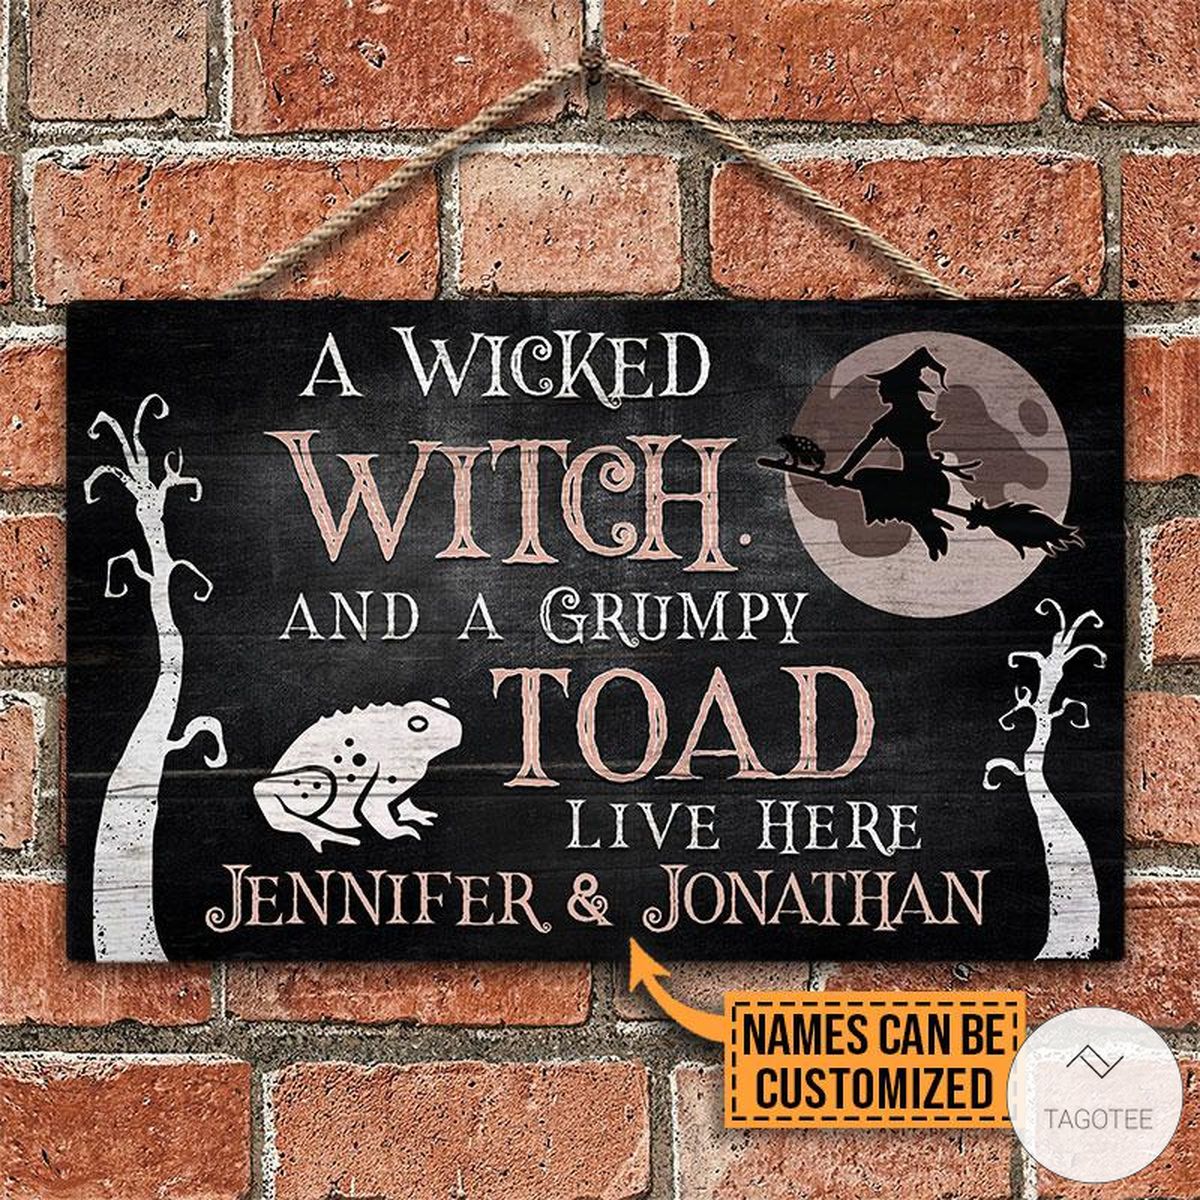 Personalized-A-Wicked-Witch-And-A-Grumpy-Toad-Live-Here-Rectangle-Wood-Signz